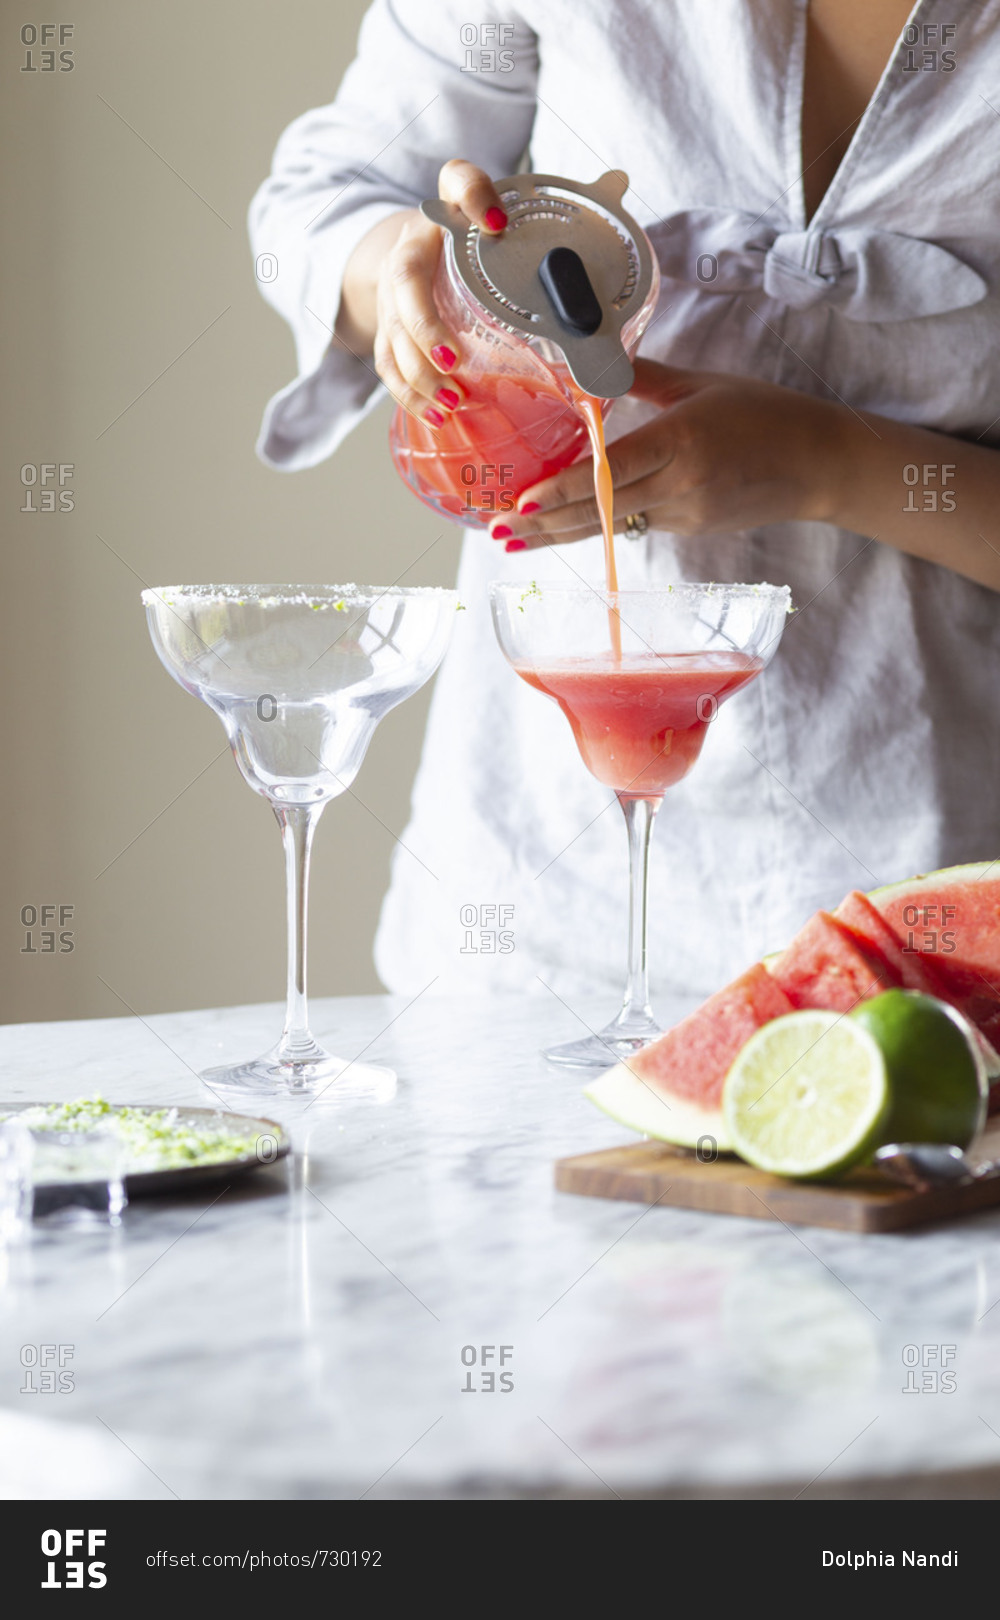 Woman pouring margarita drink from a pitcher into a glass